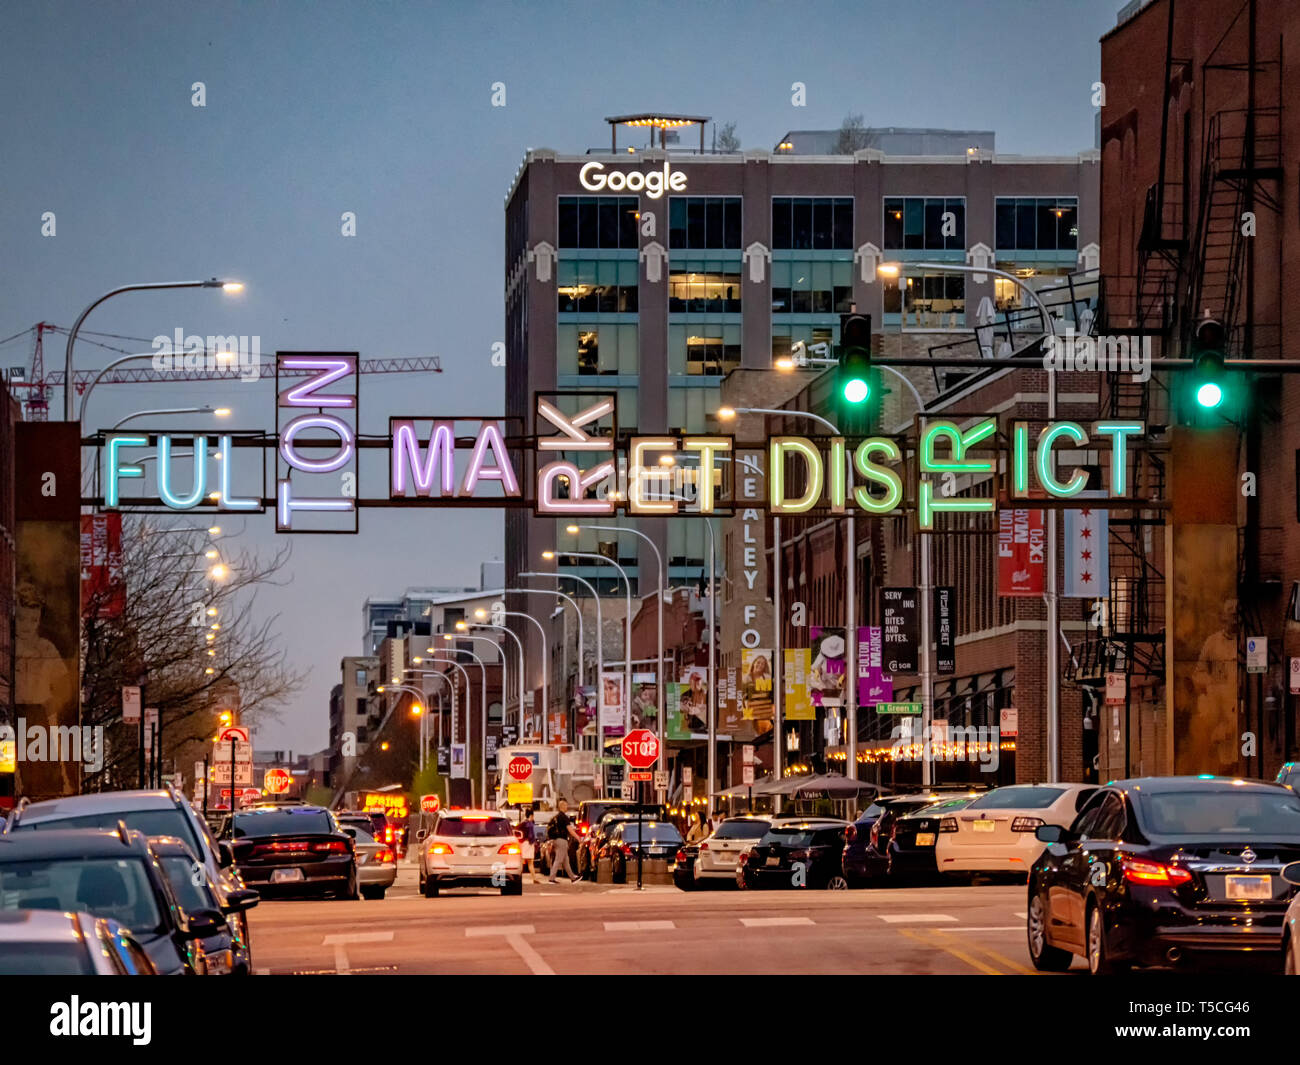 Fulton Market, Chicago-April 22, 2019: The busy Fulton Market District entrance and streetscape near Halsted Street. Google office in background. Stock Photo